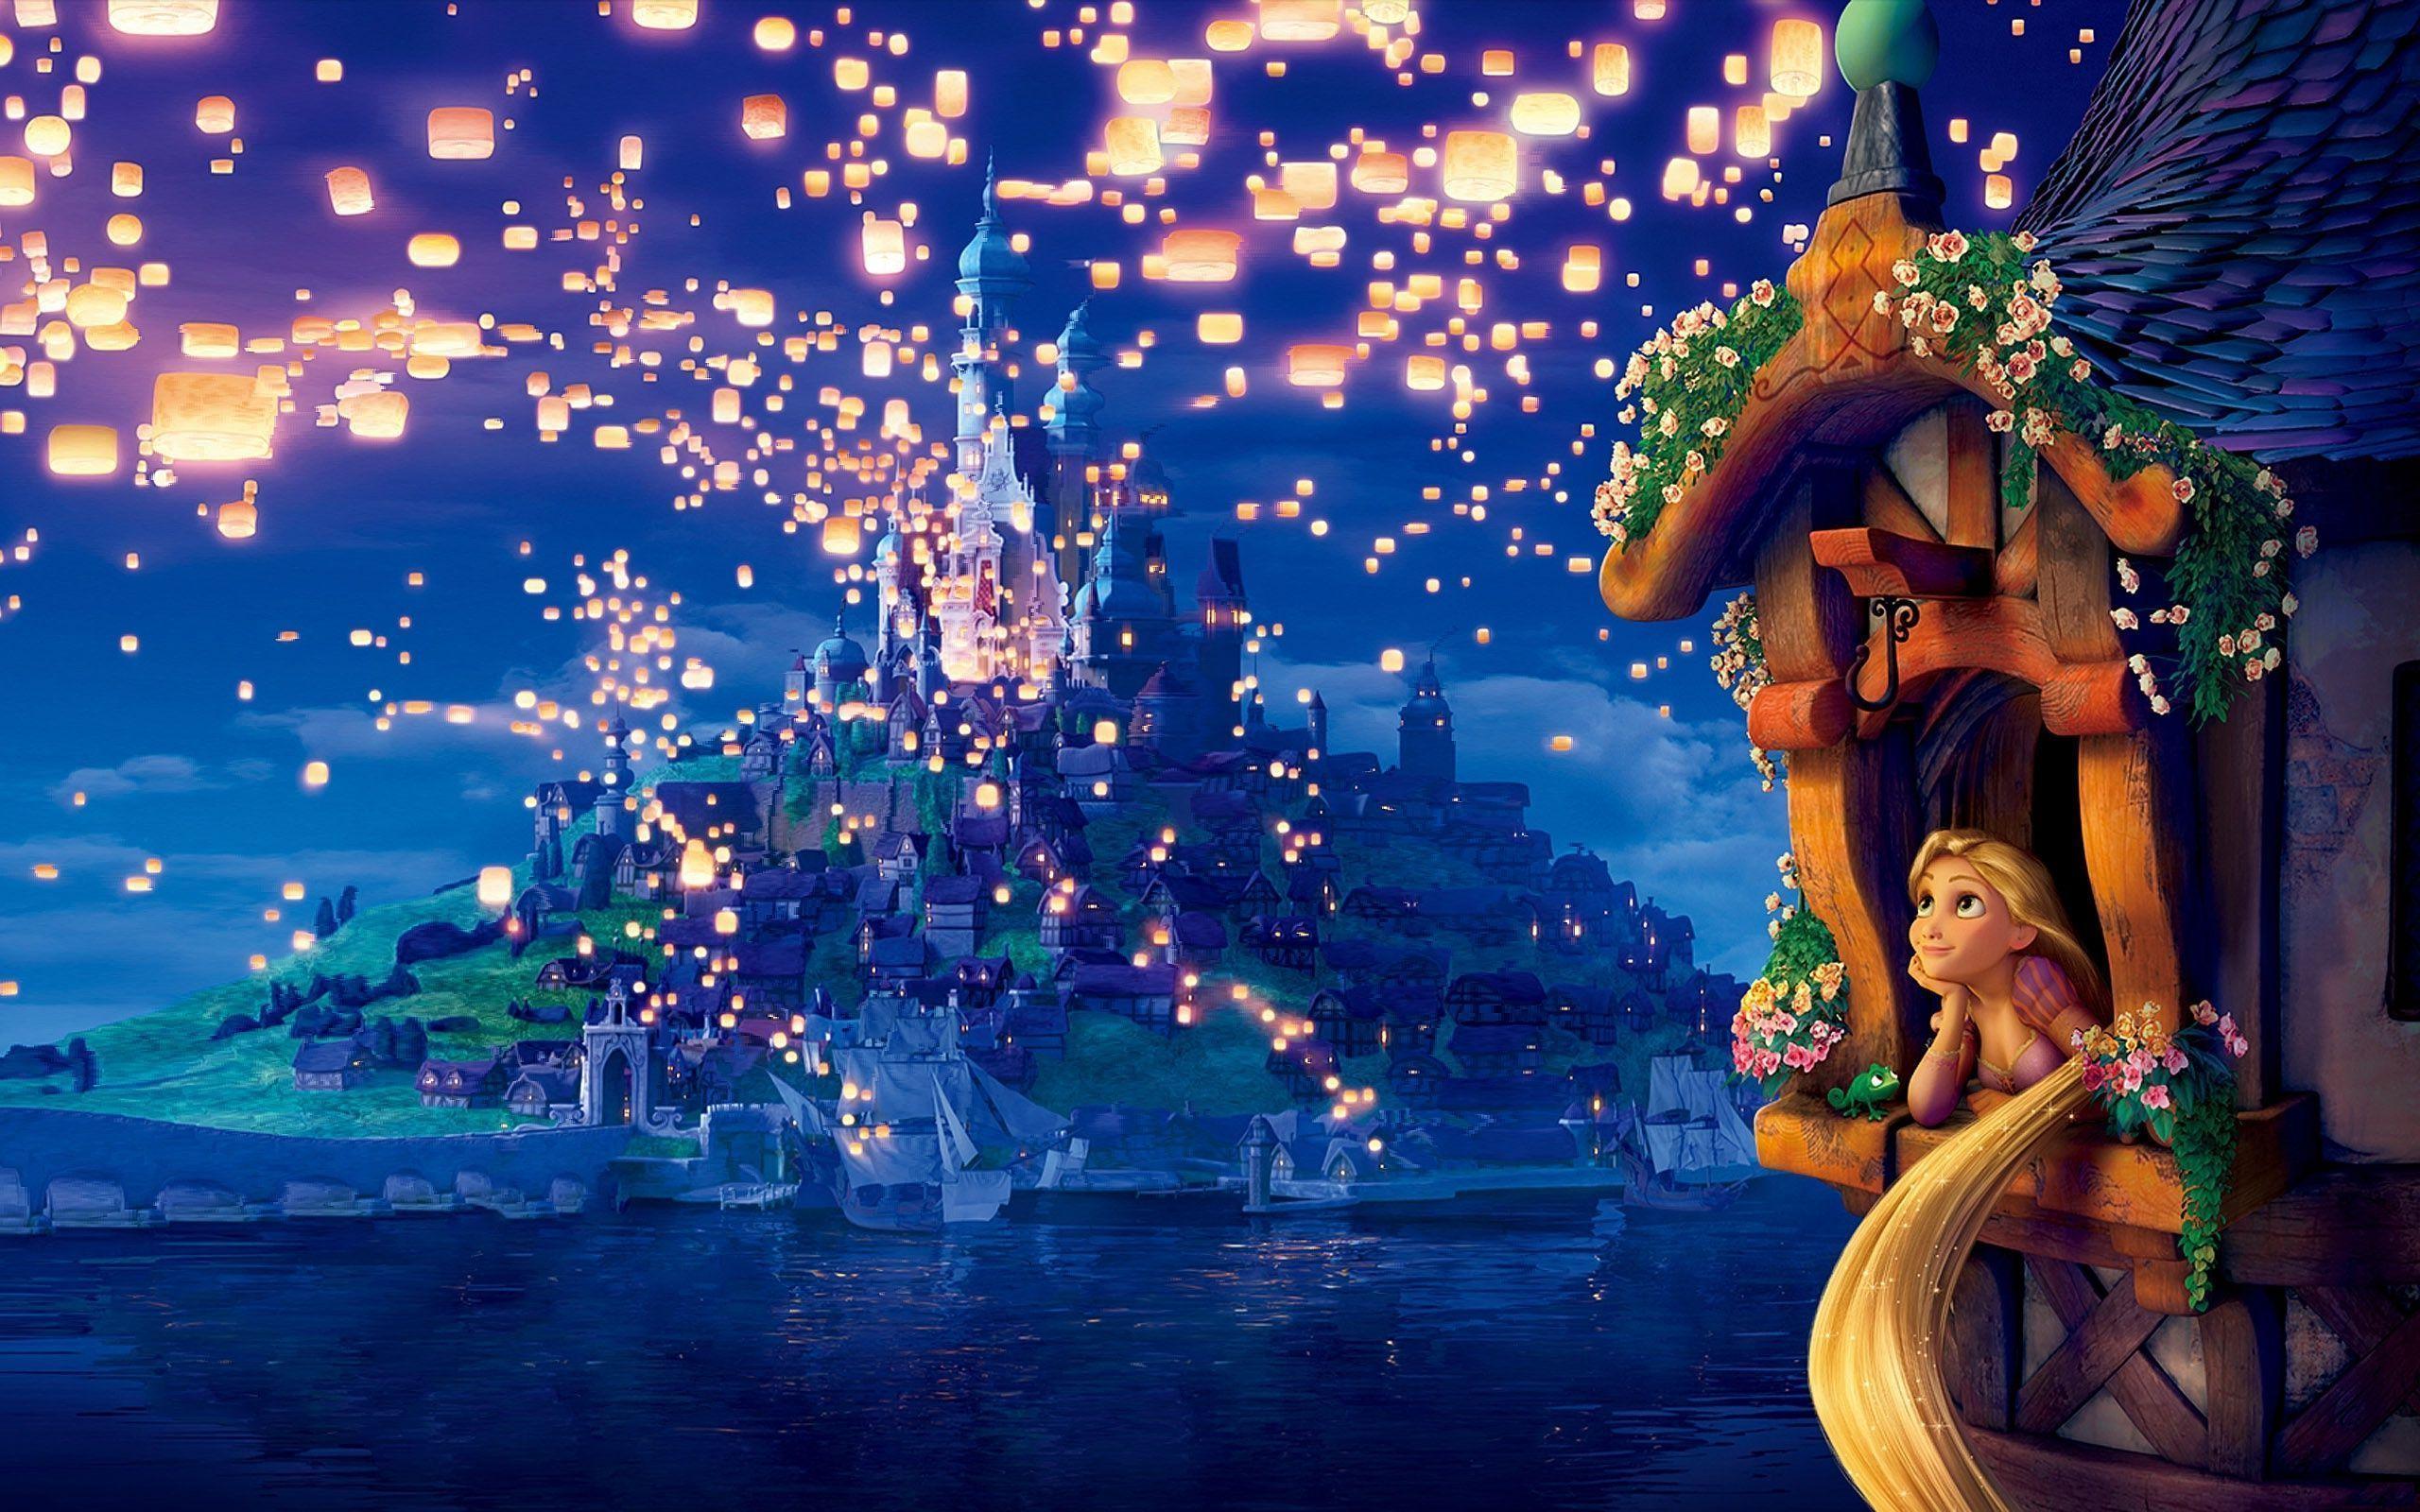 tangled ever after wallpaper